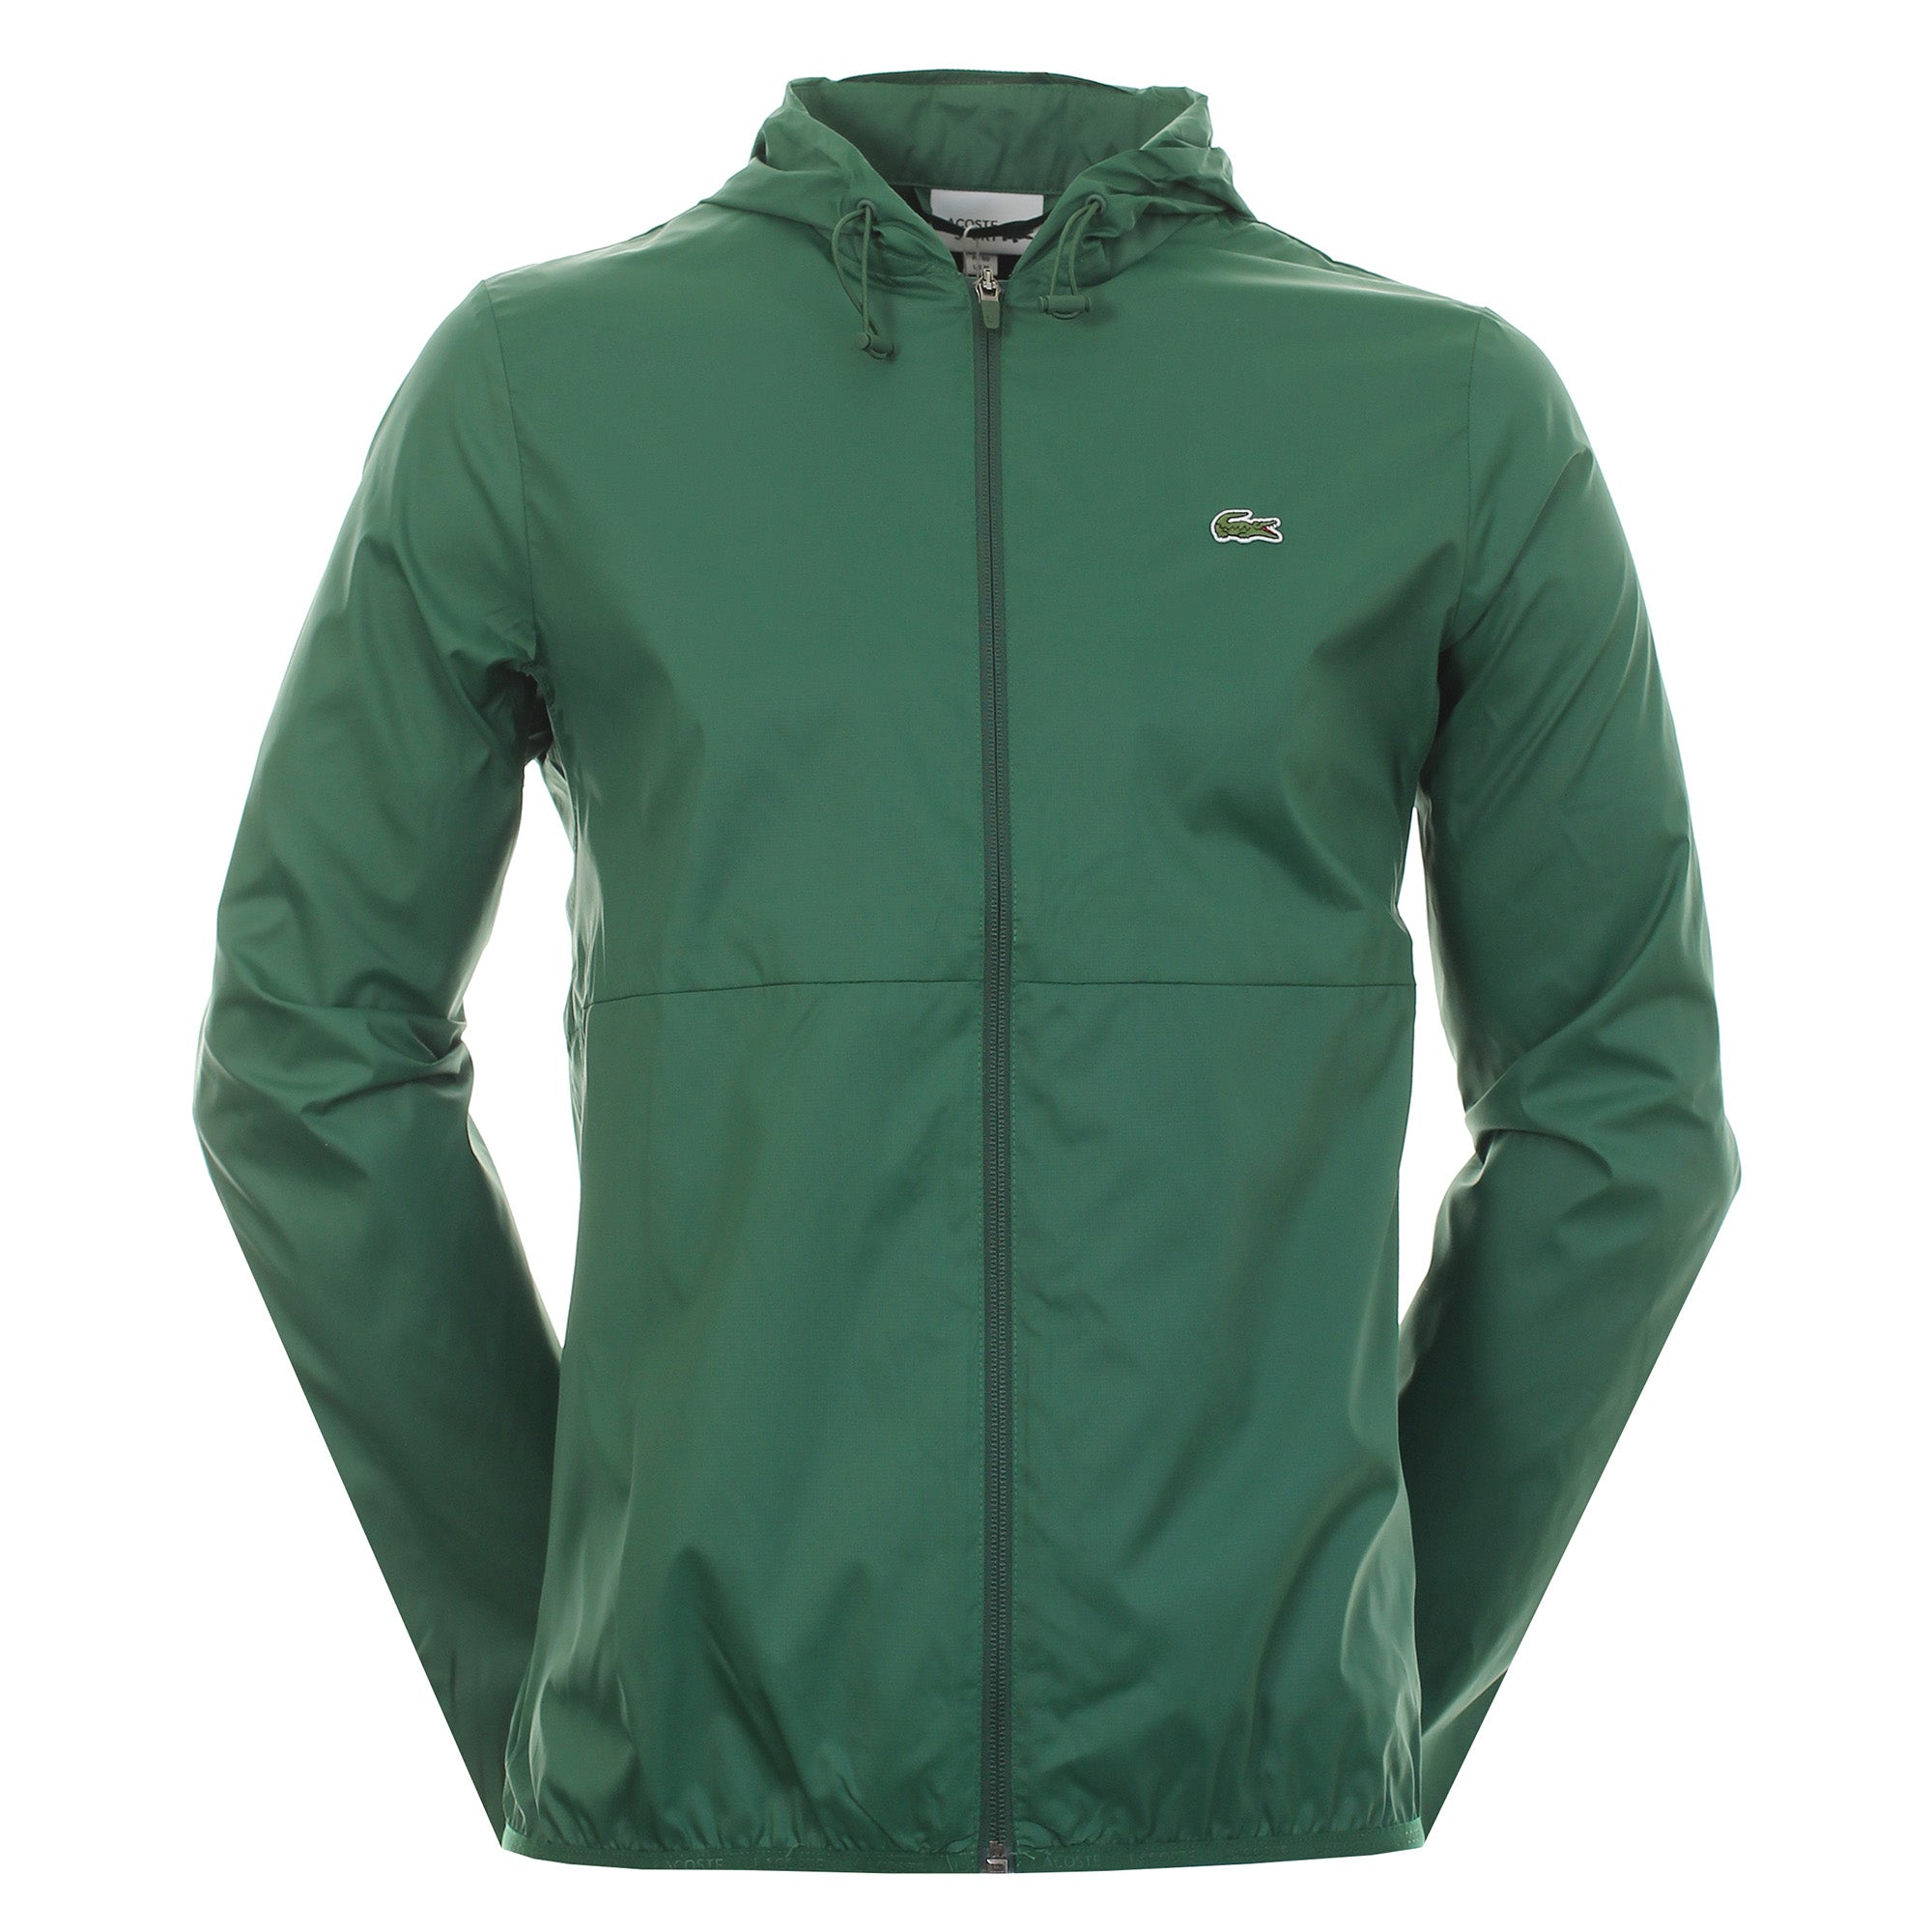 Lacoste Full Zip Hooded Wind Jacket BH1536 Green 132 | Function18